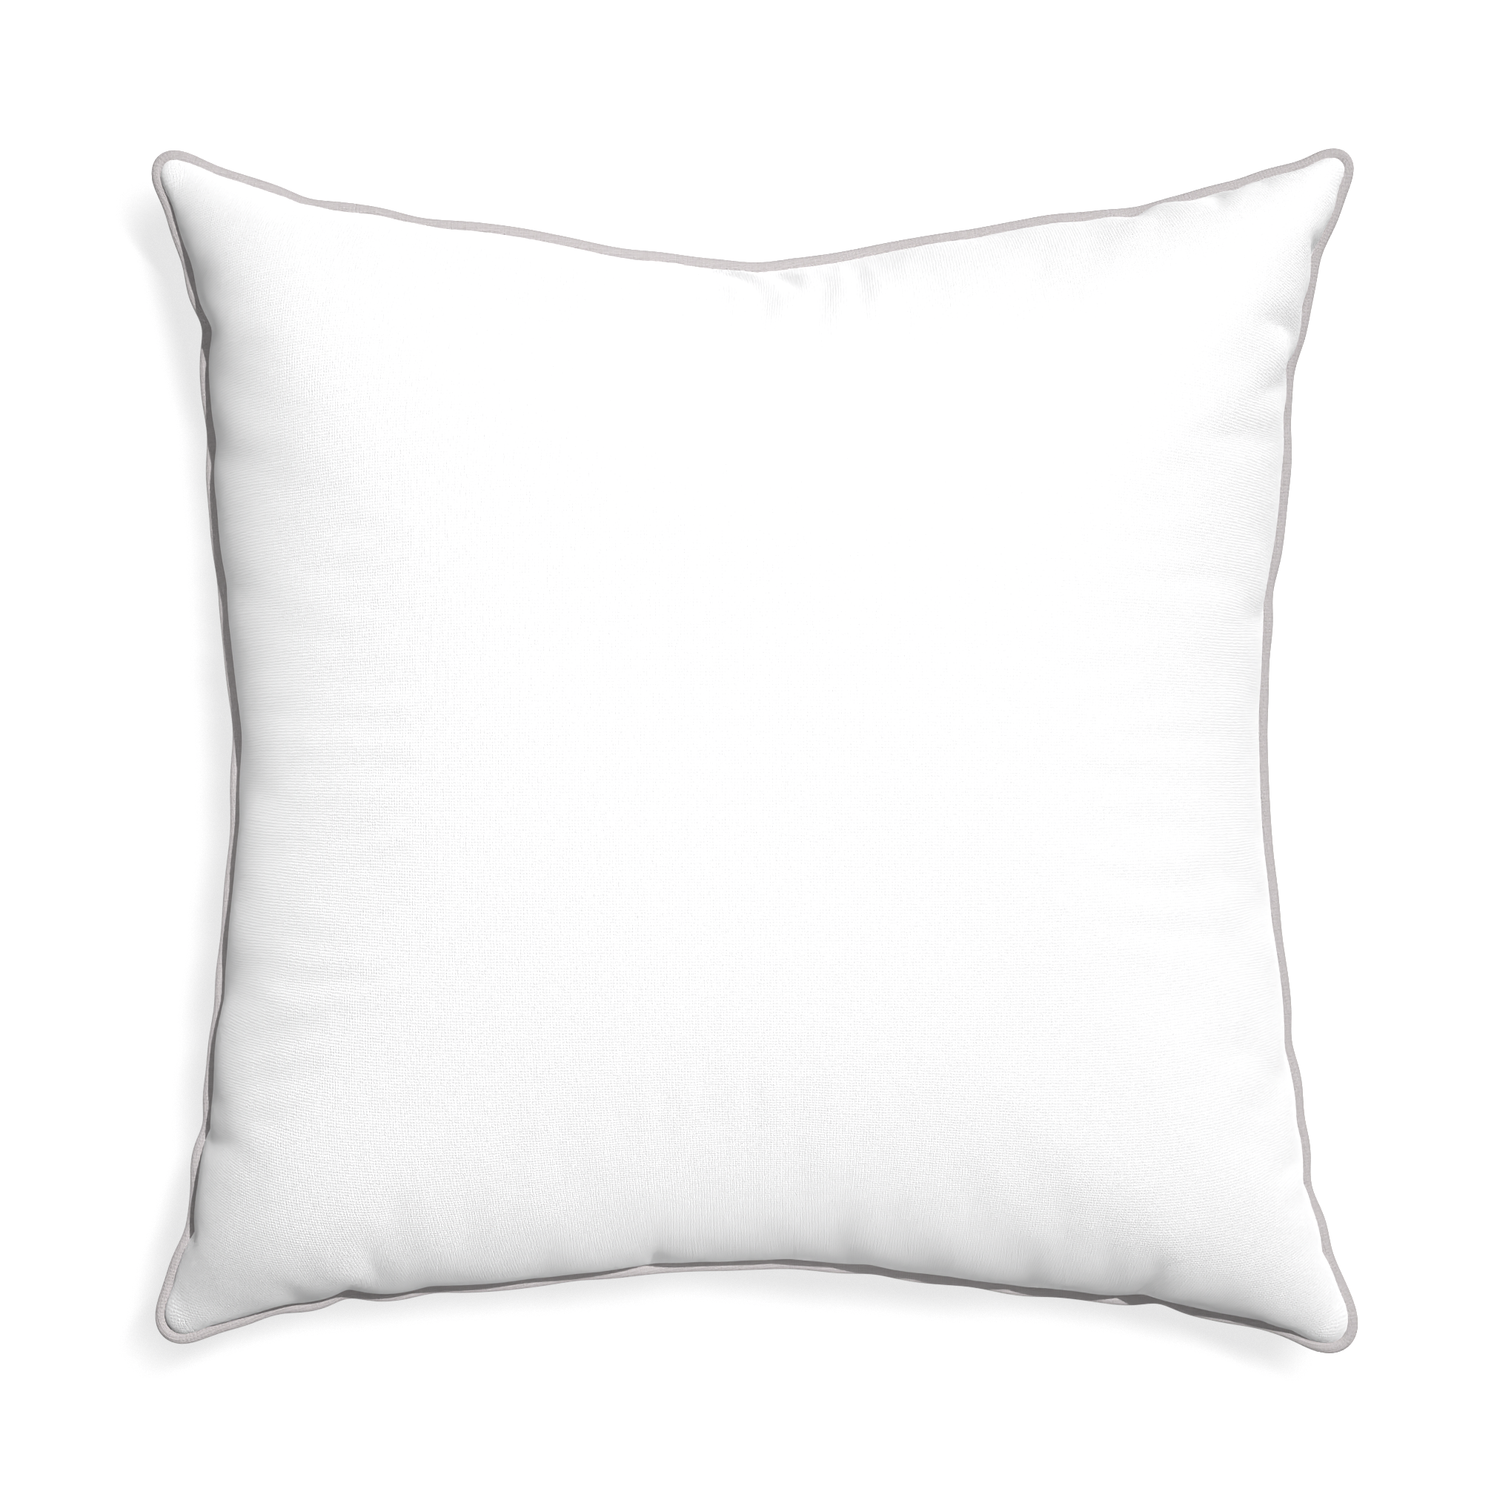 Euro-sham snow custom pillow with pebble piping on white background